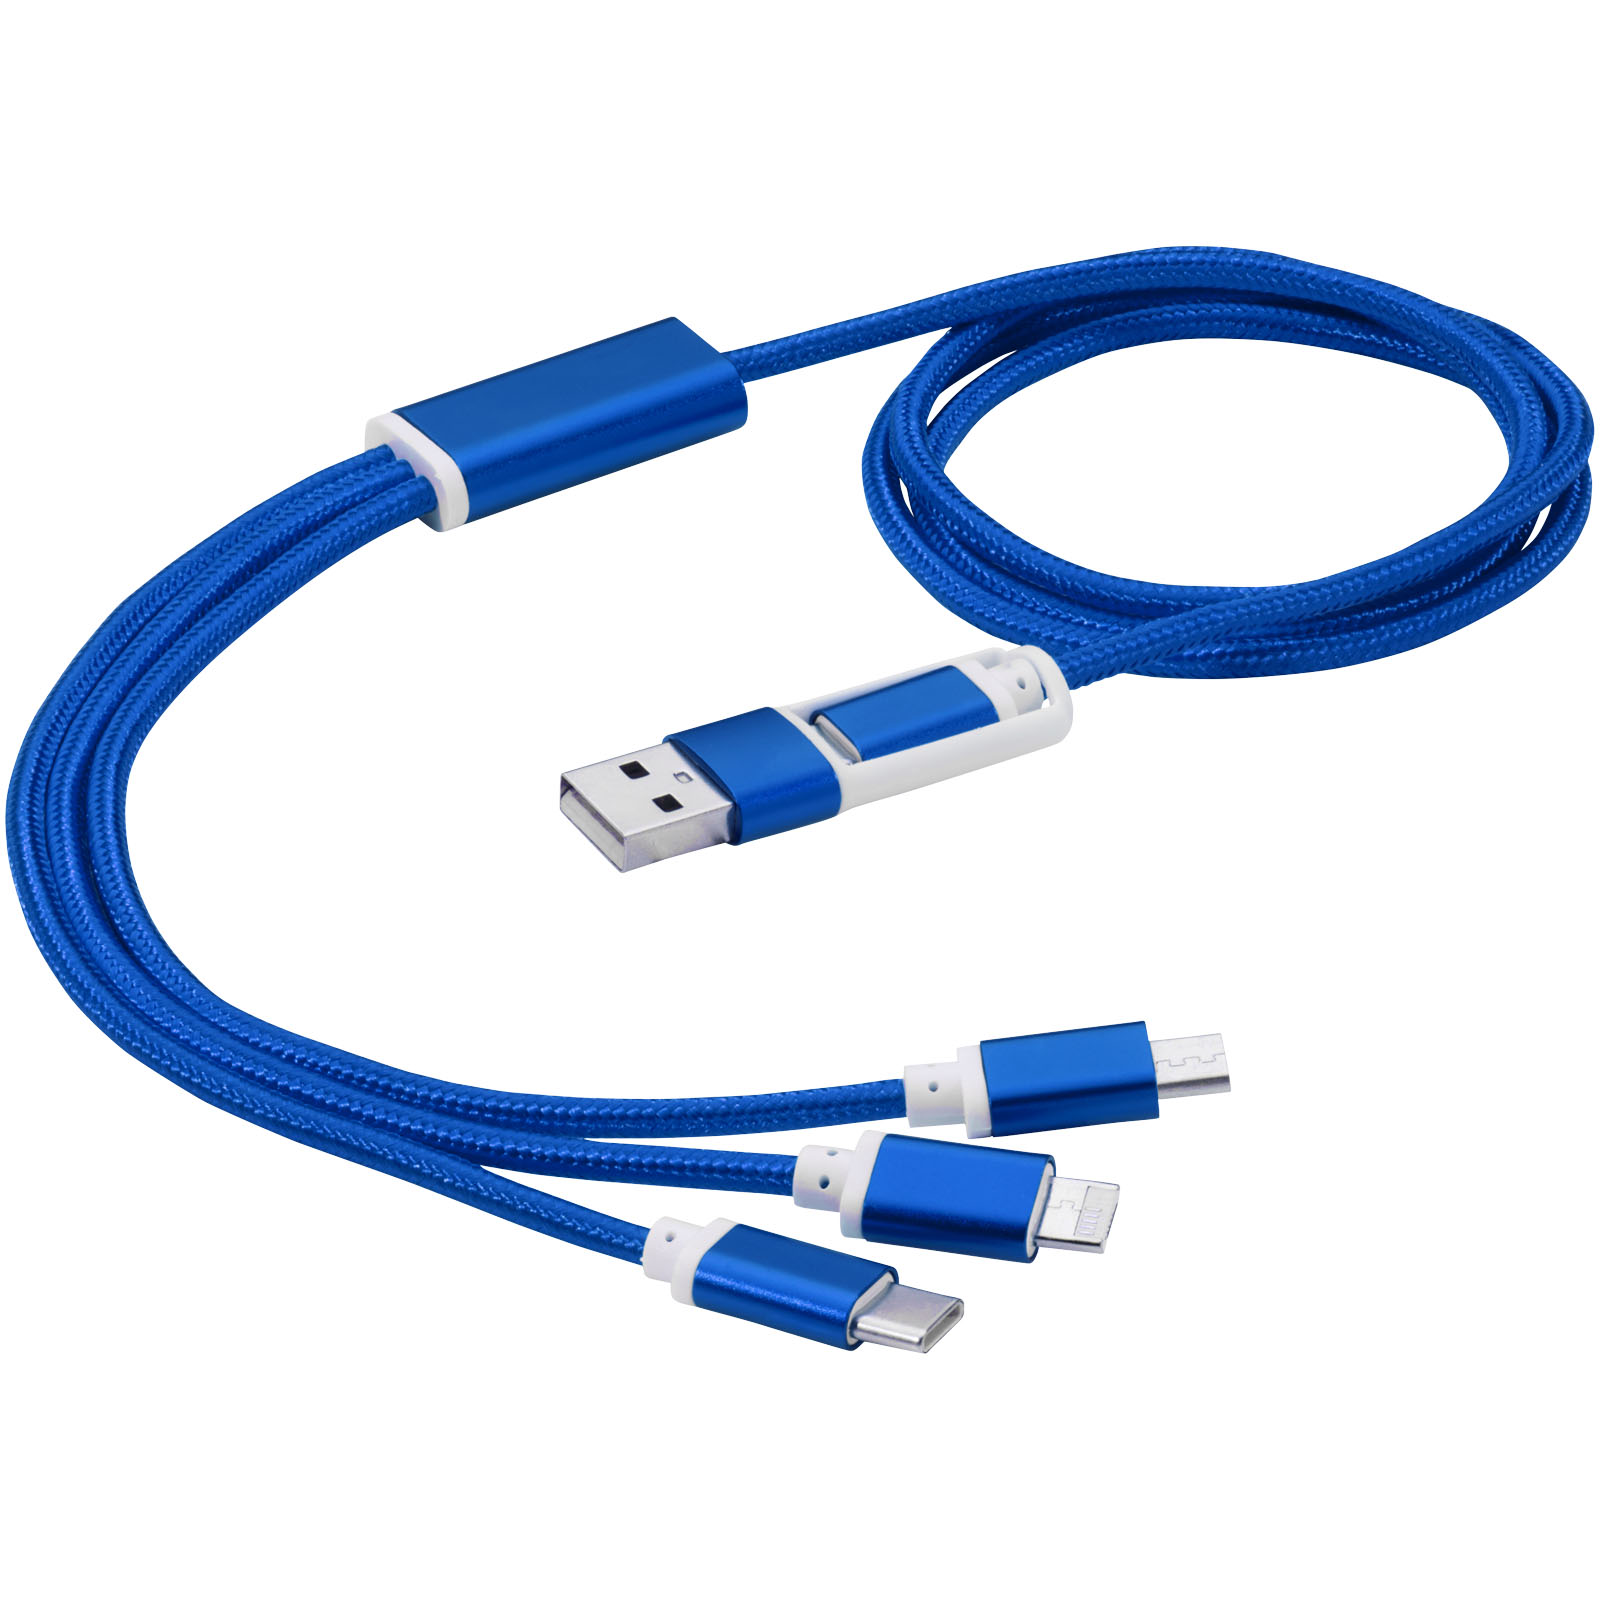 Technology - Versatile 5-in-1 charging cable